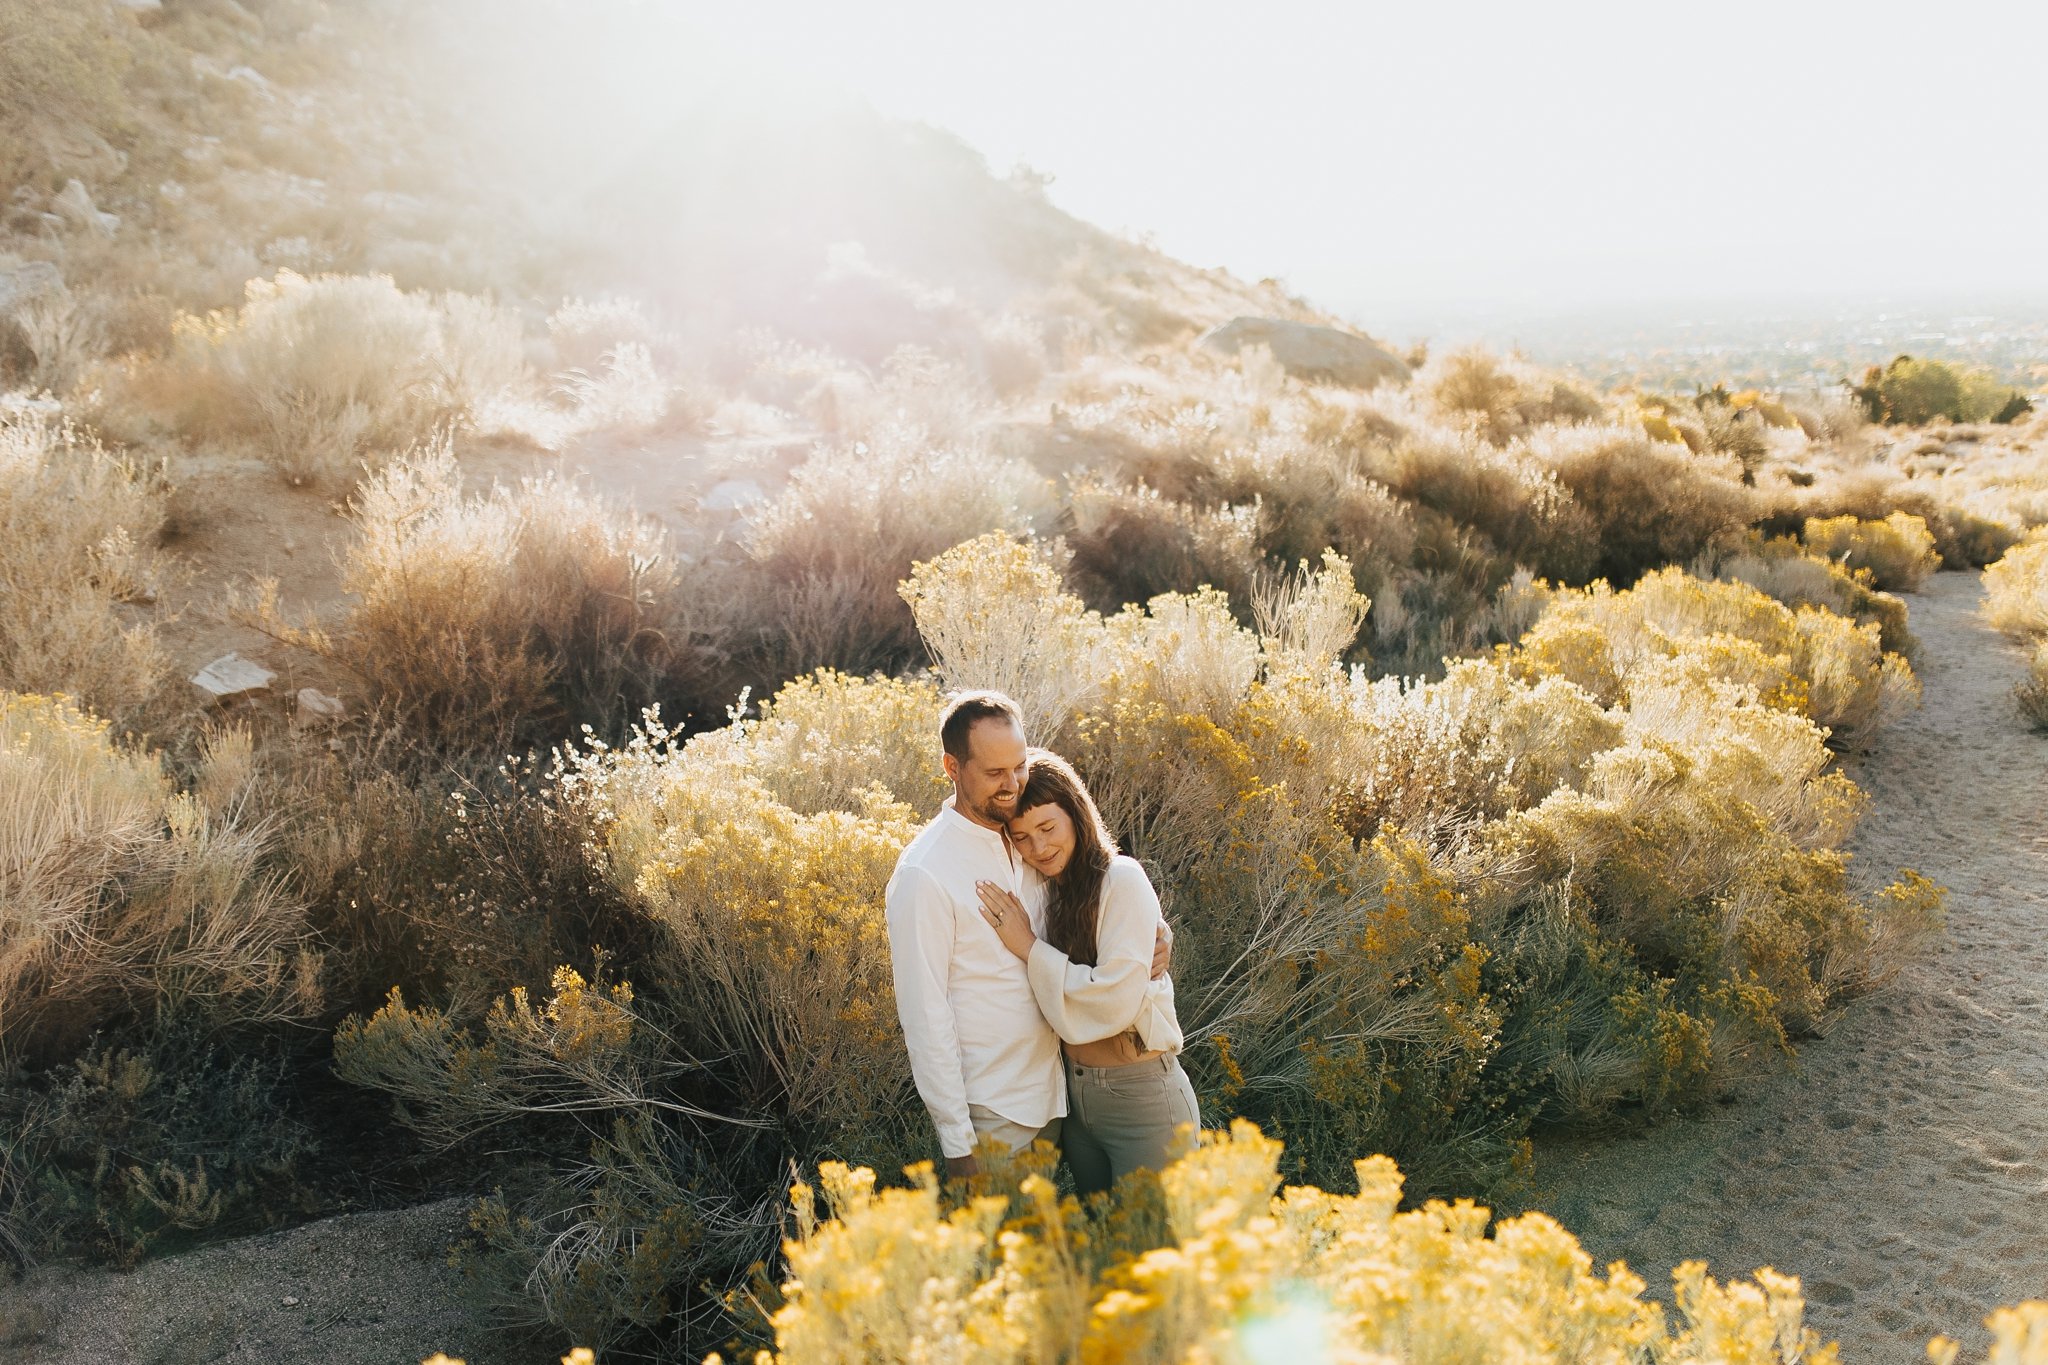 Alicia+lucia+photography+-+albuquerque+wedding+photographer+-+santa+fe+wedding+photography+-+new+mexico+wedding+photographer+-+new+mexico+wedding+-+desert+engagement+-+foothills+engagement+-+mountain+engagement_0001.jpg